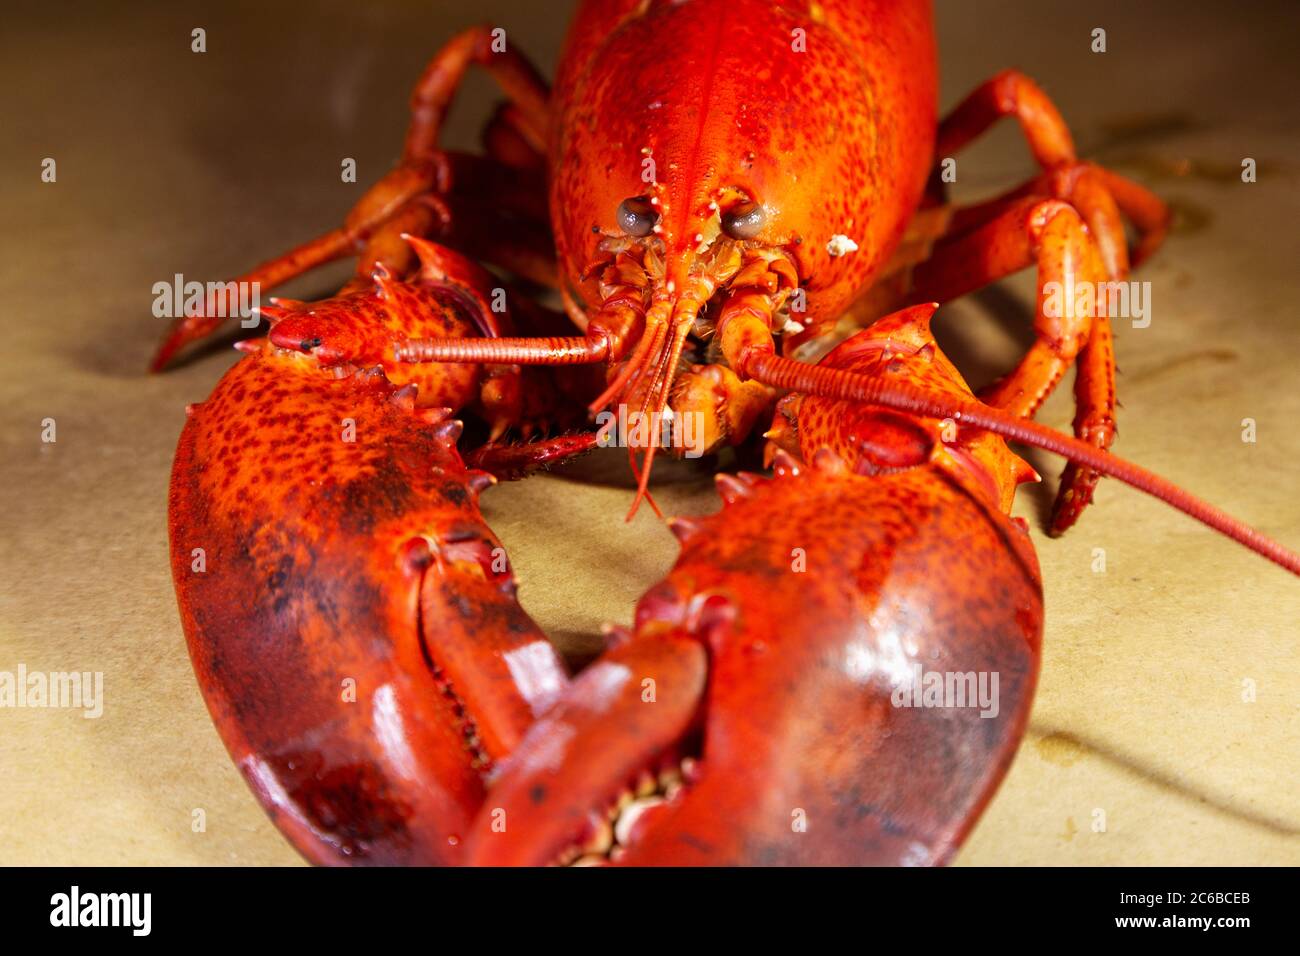 A cooked, locally landed lobster boiled and served ready to eat in a lobster dinner at Chester, Nova Scotia, Canada, North America Stock Photo